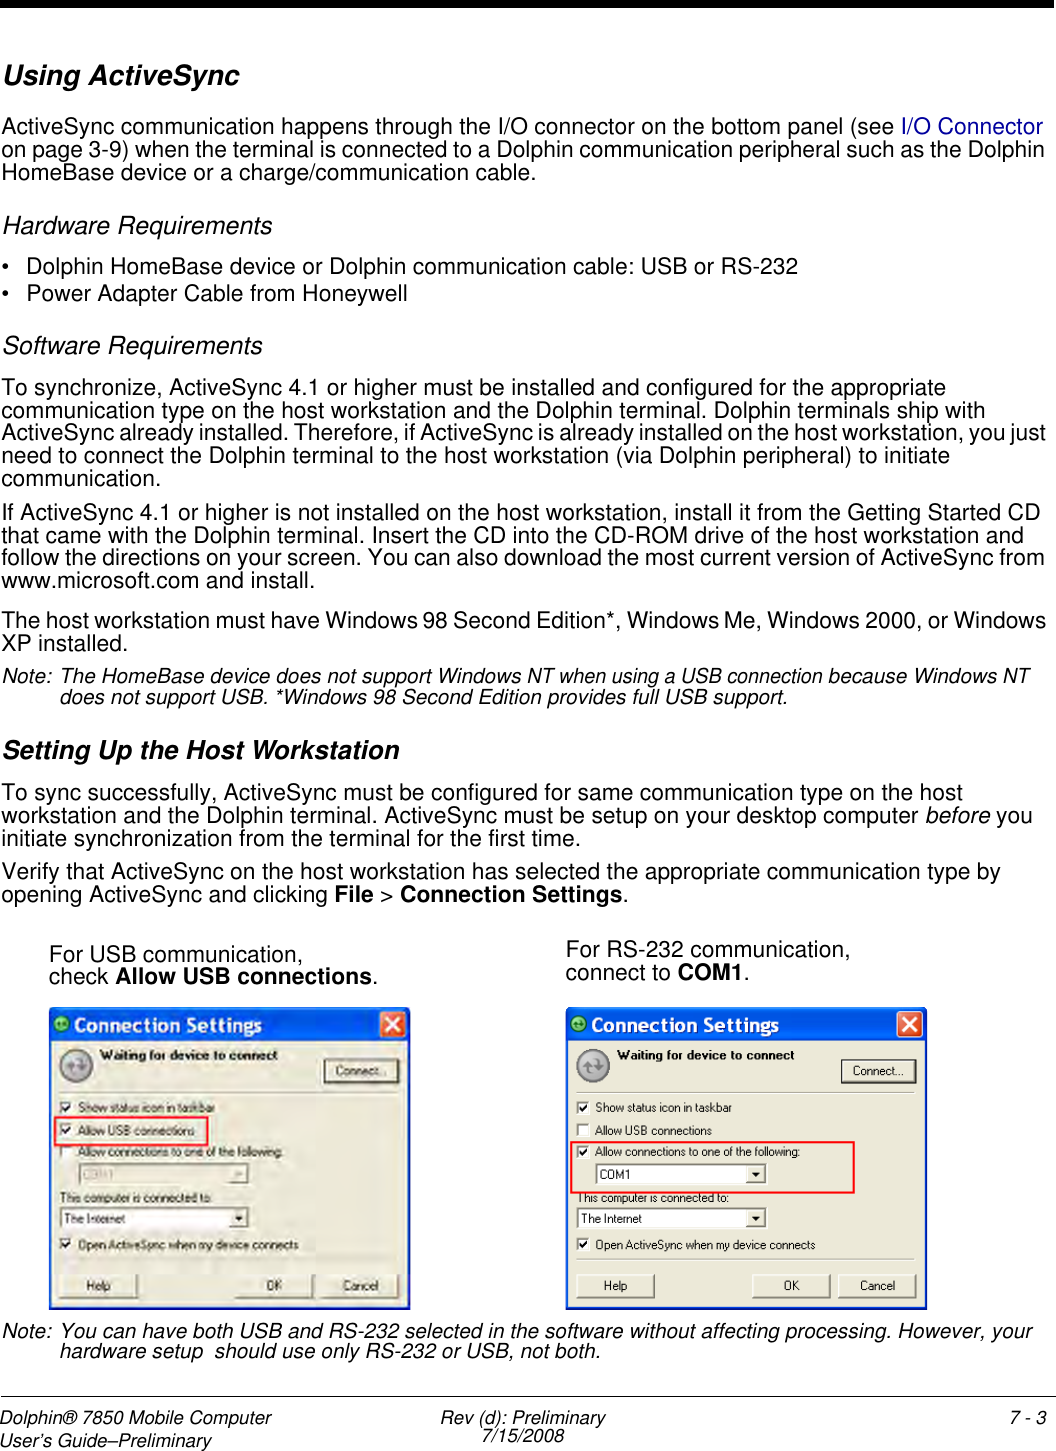 Dolphin® 7850 Mobile Computer  User’s Guide–Preliminary  Rev (d): Preliminary7/15/2008 7 - 3Using ActiveSyncActiveSync communication happens through the I/O connector on the bottom panel (see I/O Connector on page 3-9) when the terminal is connected to a Dolphin communication peripheral such as the Dolphin HomeBase device or a charge/communication cable.Hardware Requirements• Dolphin HomeBase device or Dolphin communication cable: USB or RS-232• Power Adapter Cable from HoneywellSoftware RequirementsTo synchronize, ActiveSync 4.1 or higher must be installed and configured for the appropriate communication type on the host workstation and the Dolphin terminal. Dolphin terminals ship with ActiveSync already installed. Therefore, if ActiveSync is already installed on the host workstation, you just need to connect the Dolphin terminal to the host workstation (via Dolphin peripheral) to initiate communication.If ActiveSync 4.1 or higher is not installed on the host workstation, install it from the Getting Started CD that came with the Dolphin terminal. Insert the CD into the CD-ROM drive of the host workstation and follow the directions on your screen. You can also download the most current version of ActiveSync from www.microsoft.com and install.The host workstation must have Windows 98 Second Edition*, Windows Me, Windows 2000, or Windows XP installed. Note: The HomeBase device does not support Windows NT when using a USB connection because Windows NT does not support USB. *Windows 98 Second Edition provides full USB support.Setting Up the Host WorkstationTo sync successfully, ActiveSync must be configured for same communication type on the host workstation and the Dolphin terminal. ActiveSync must be setup on your desktop computer before you initiate synchronization from the terminal for the first time.Verify that ActiveSync on the host workstation has selected the appropriate communication type by opening ActiveSync and clicking File &gt; Connection Settings.Note: You can have both USB and RS-232 selected in the software without affecting processing. However, your hardware setup  should use only RS-232 or USB, not both.For USB communication,check Allow USB connections.For RS-232 communication, connect to COM1.